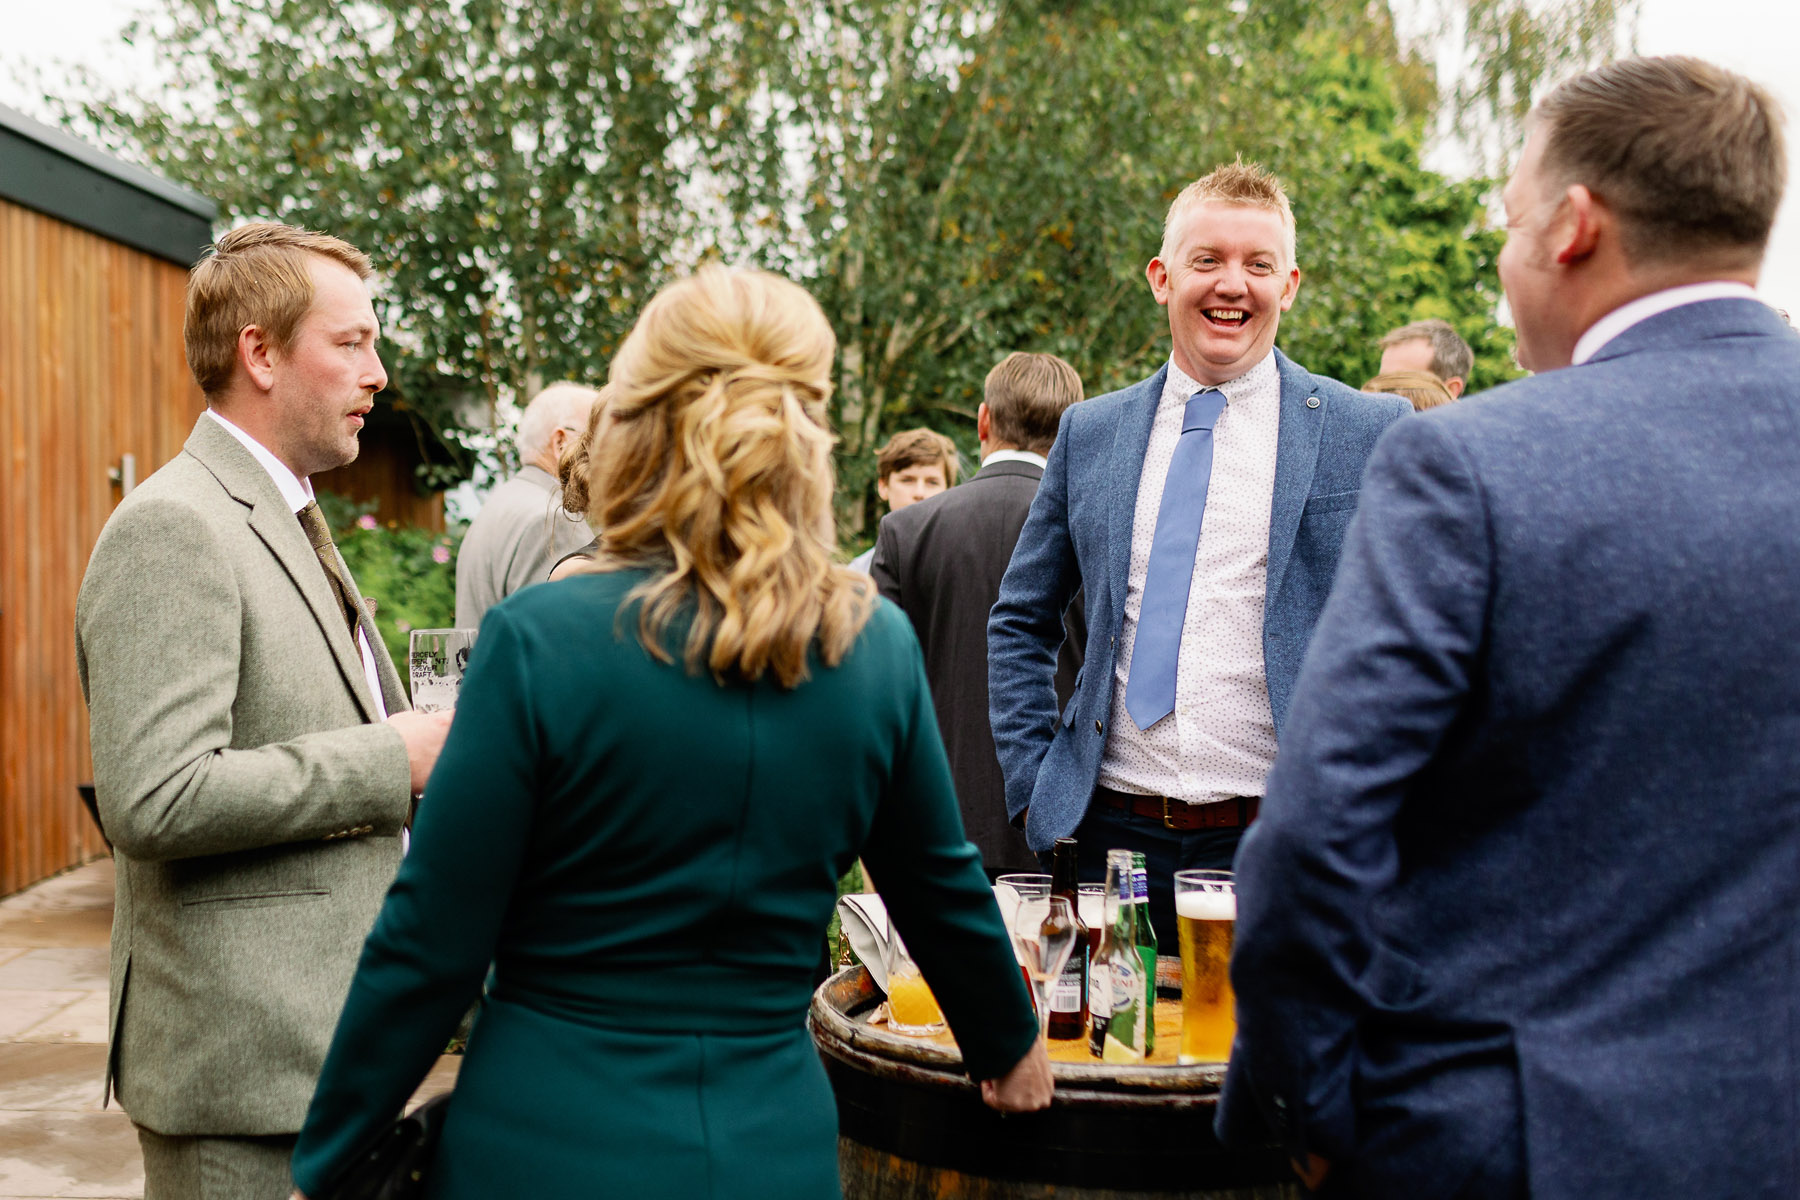 Candid and Natural Pictures of Guests at a Wedding in Lancashire 